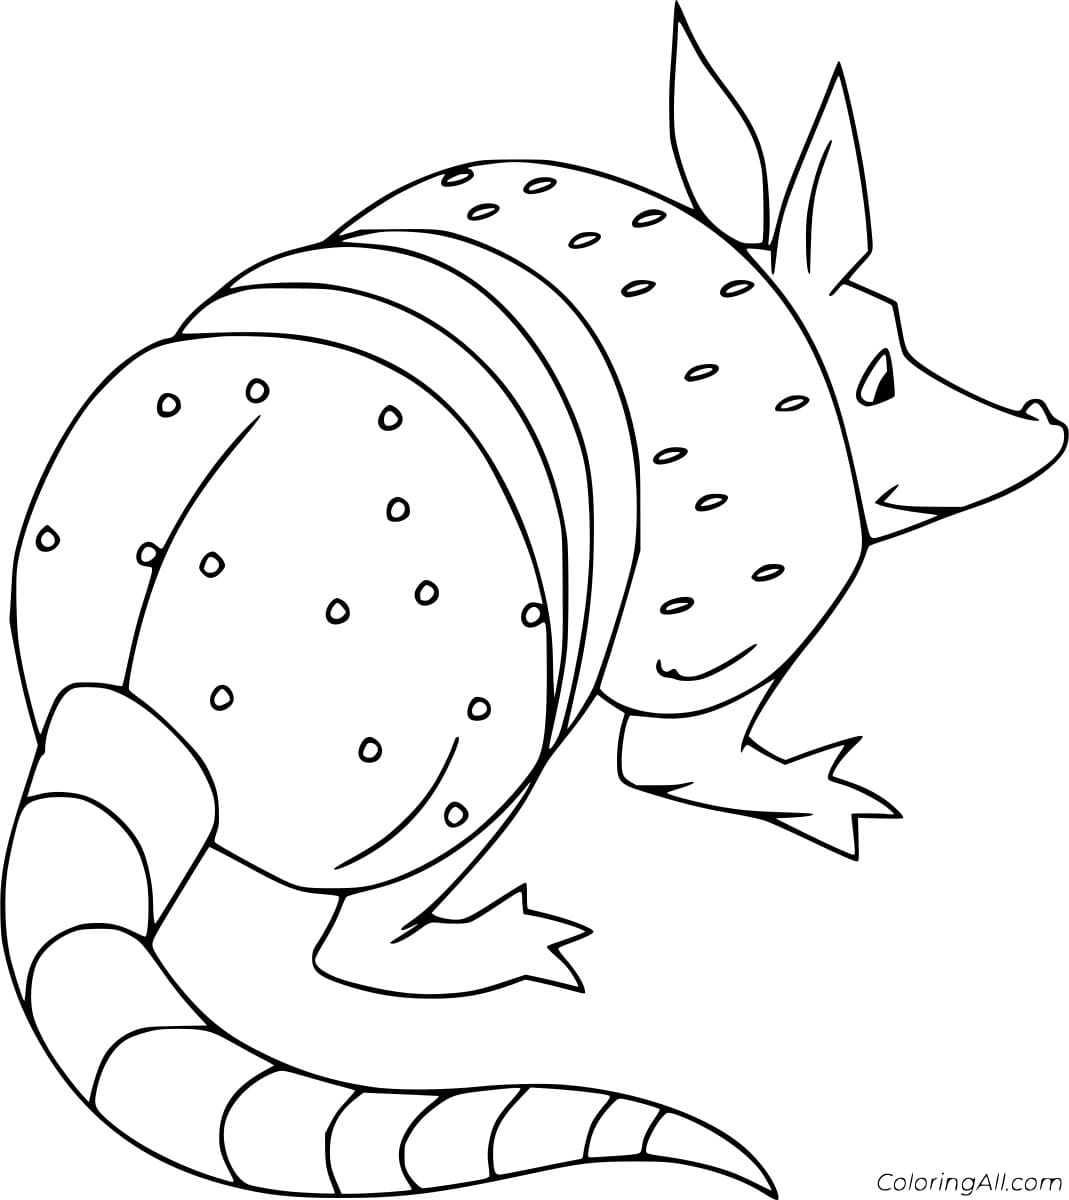 The Back of an Armadillo Coloring Coloring Page